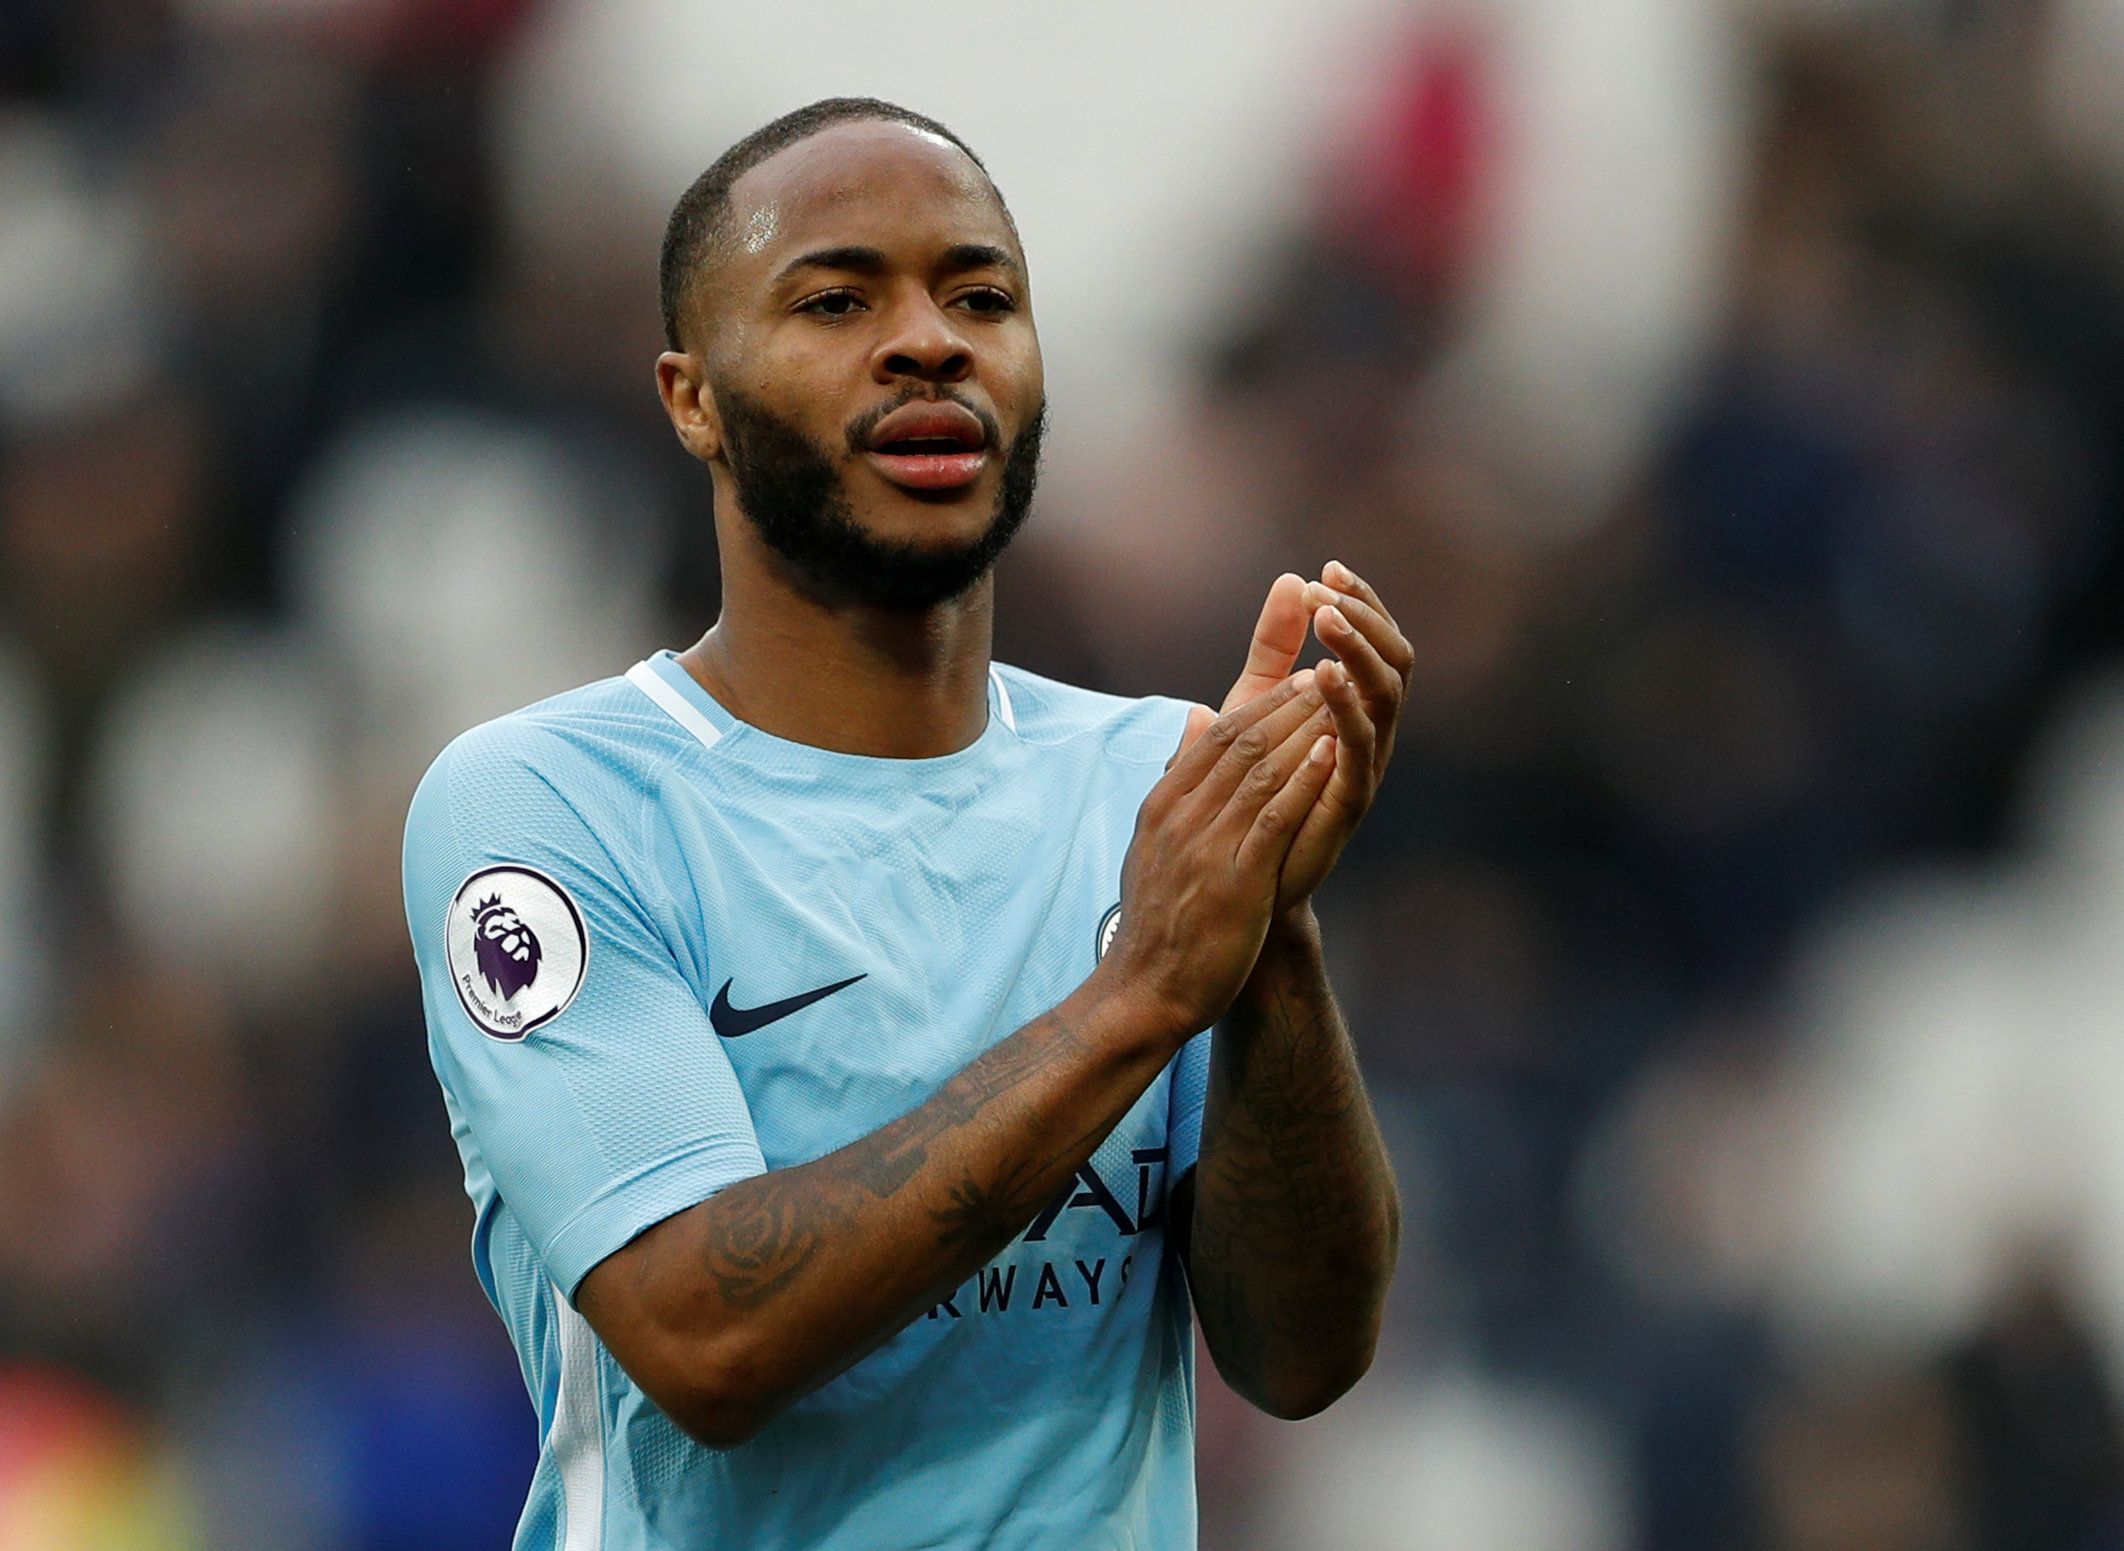 Soccer Football - Premier League - West Ham United v Manchester City - London Stadium, London, Britain - April 29, 2018   Manchester City's Raheem Sterling applauds the fans after the match   Action Images via Reuters/John Sibley    EDITORIAL USE ONLY. No use with unauthorized audio, video, data, fixture lists, club/league logos or "live" services. Online in-match use limited to 75 images, no video emulation. No use in betting, games or single club/league/player publications.  Please contact you